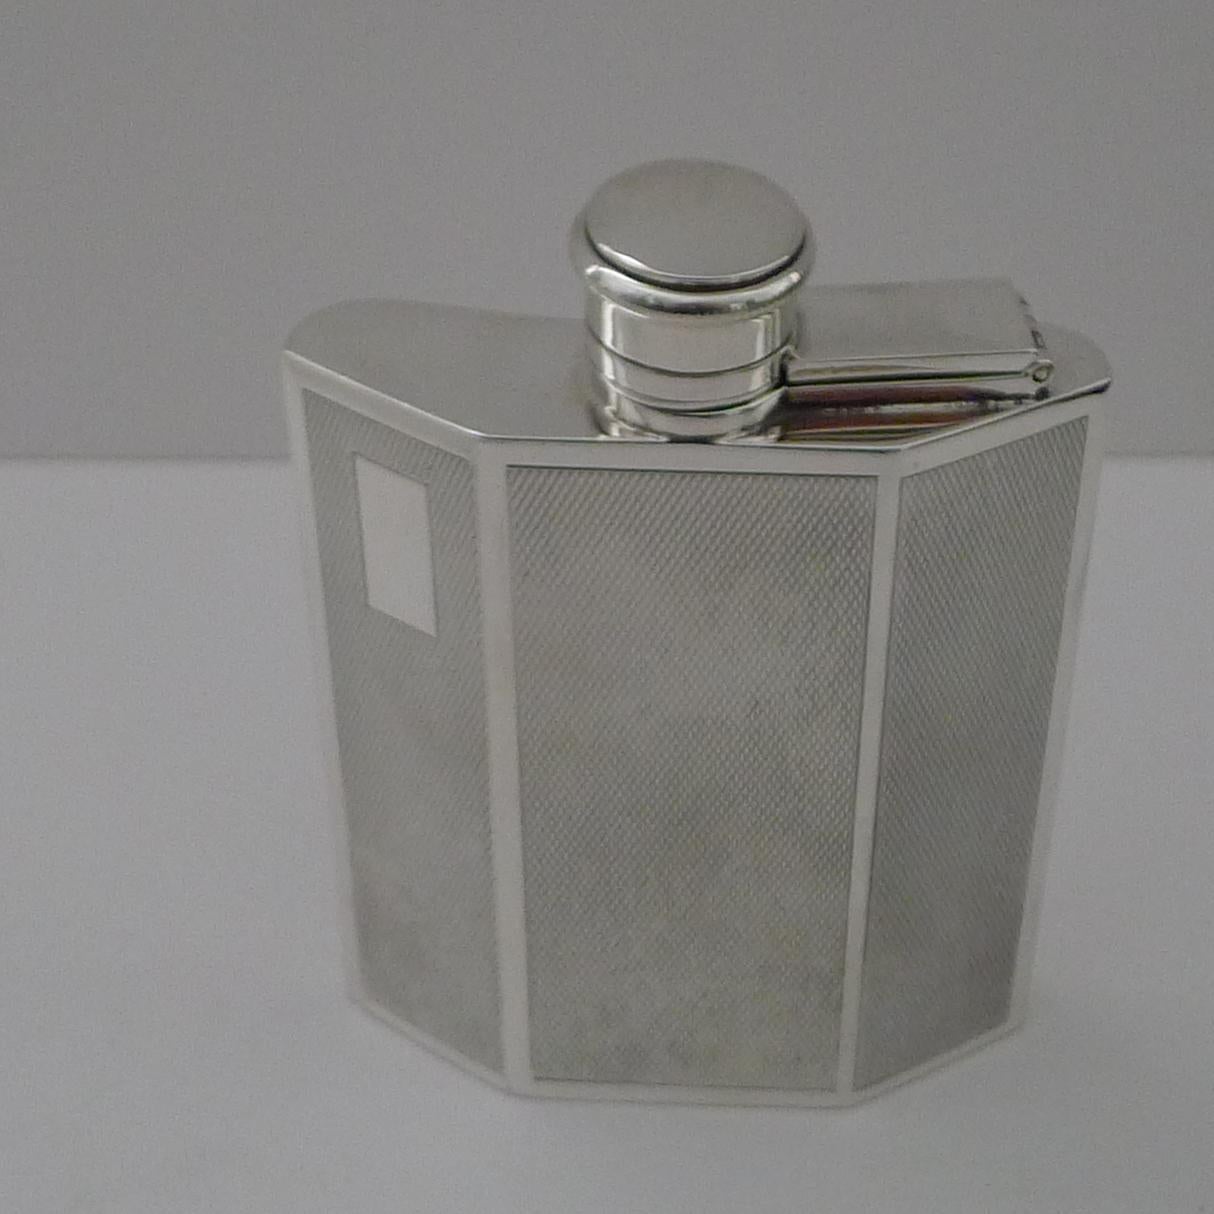 A striking vintage solid English / sterling silver spirit flask reminiscent of a traditional car radiator.

The flask is engine-turned decoration with a vacant cartouche to the left hand panel.  Shaped perfectly to fit in a pocket, the lid has a